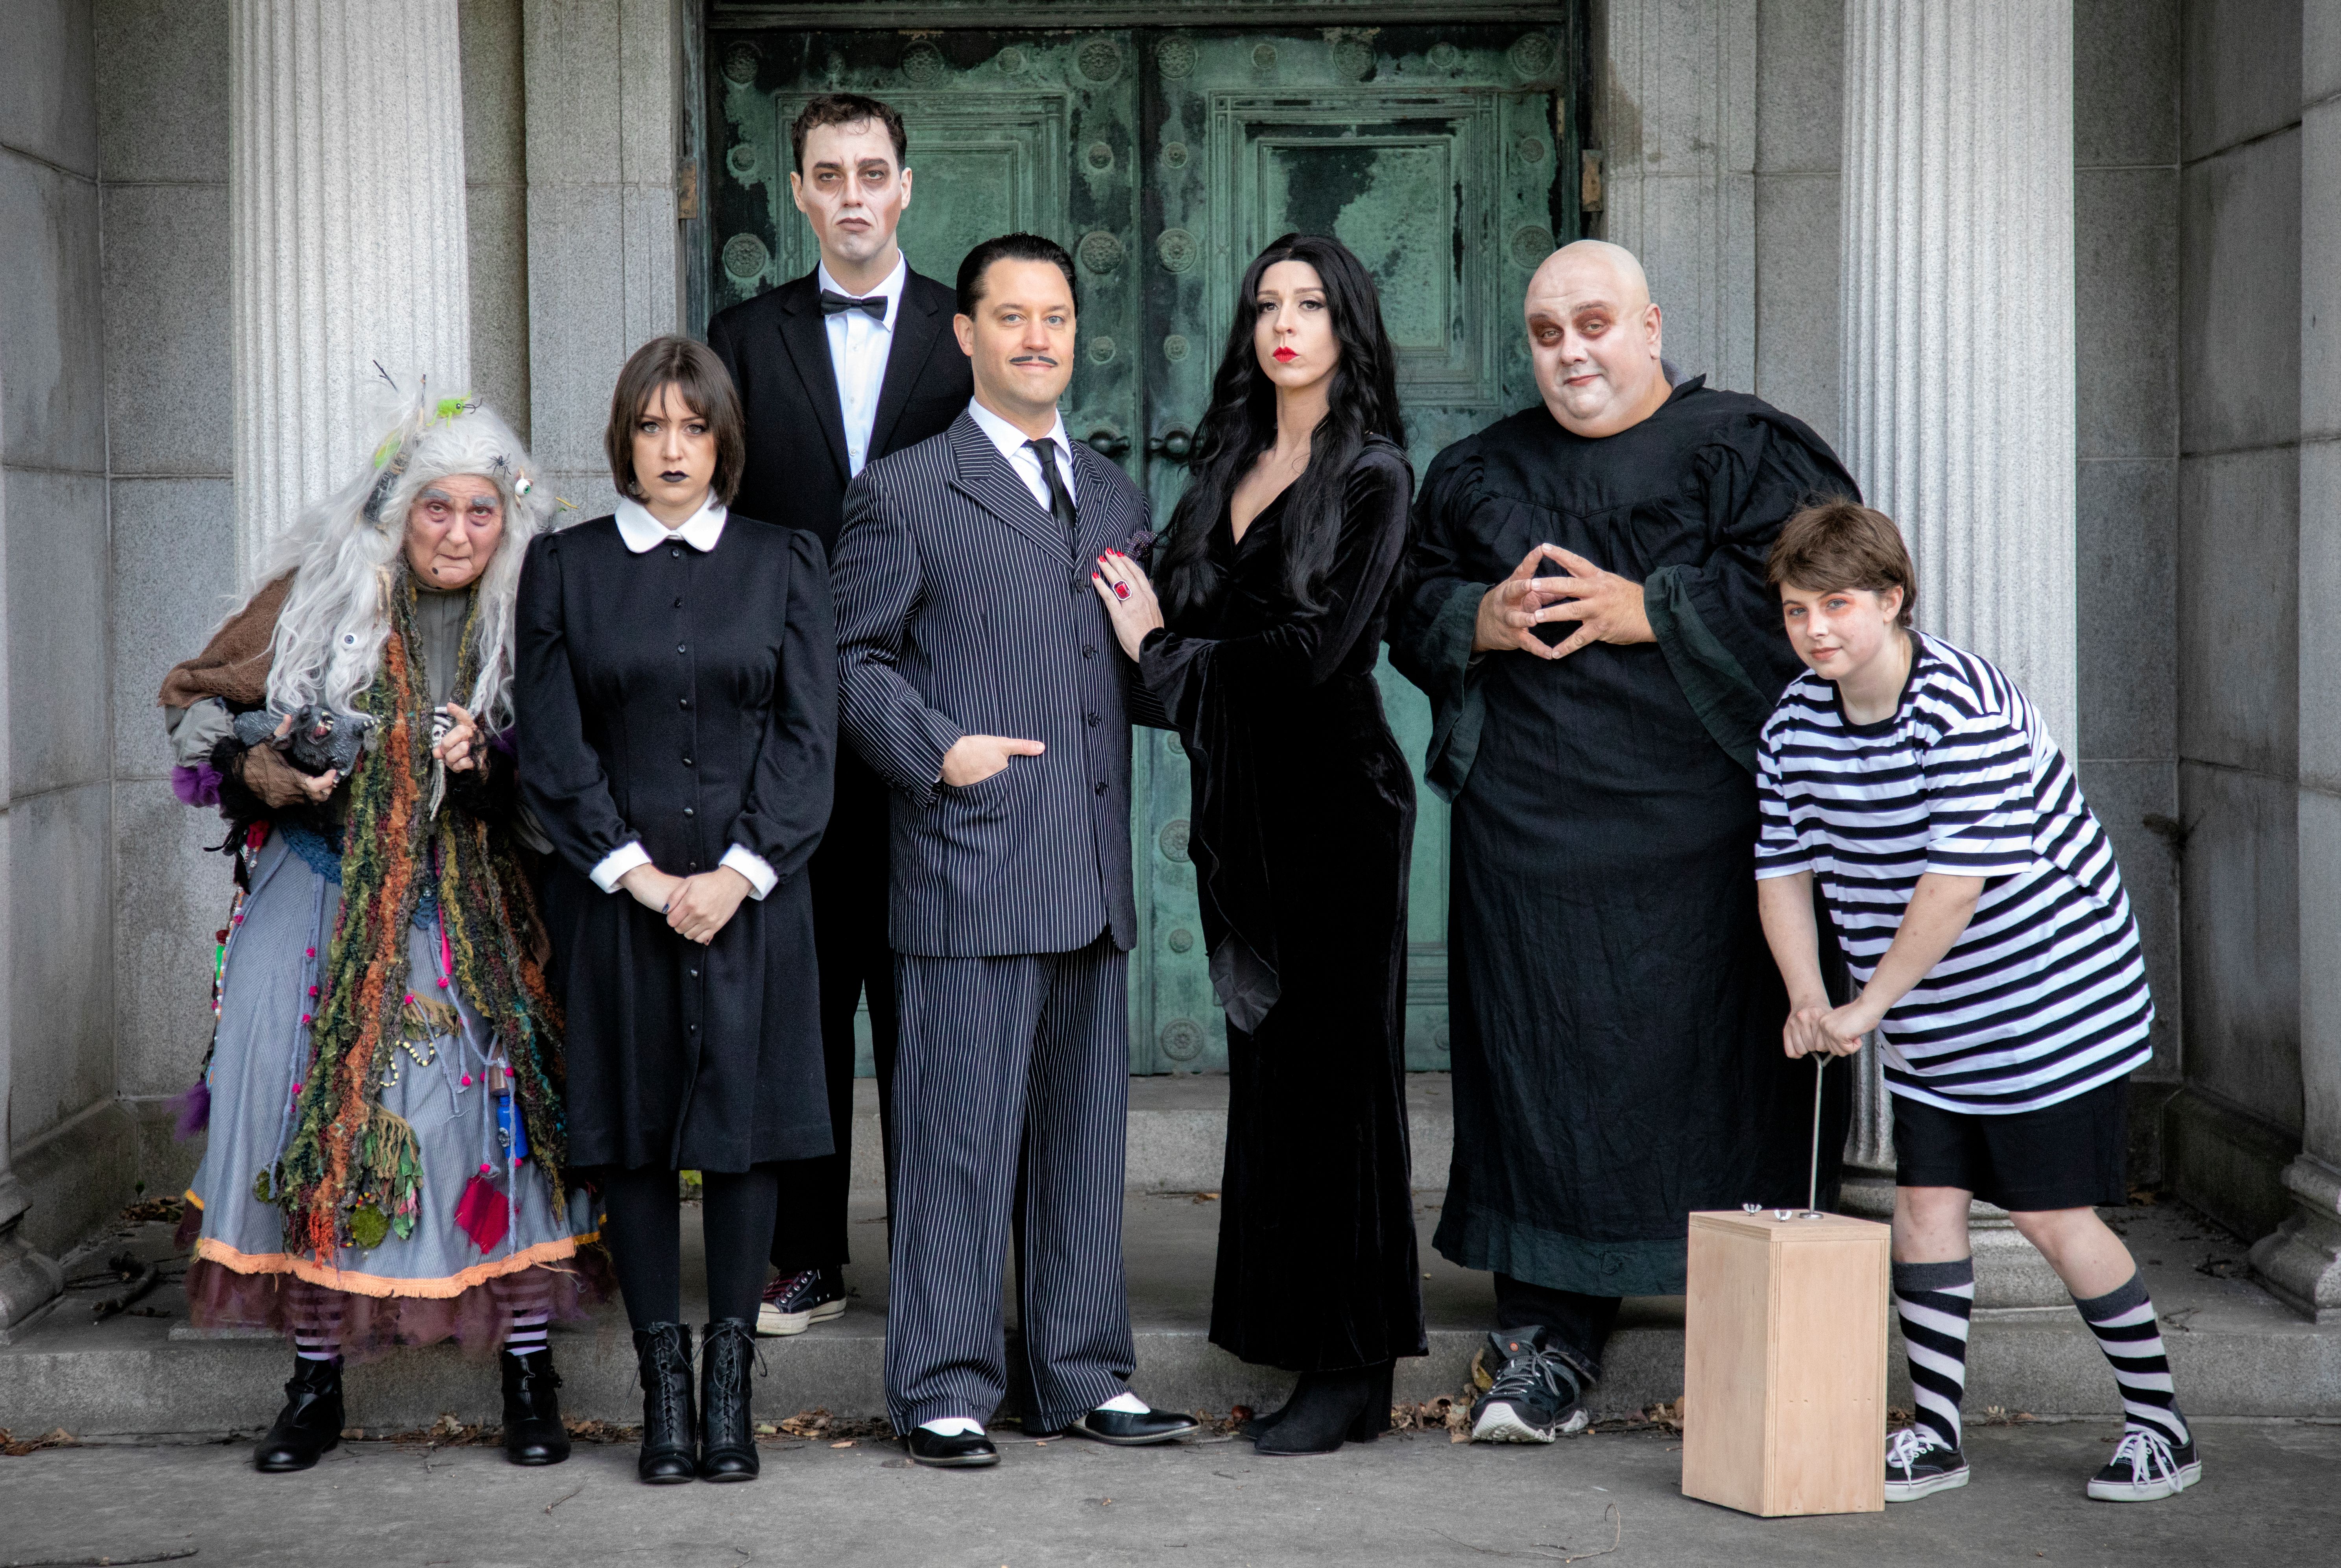 The Addams Family poses in front of their mausoleum. Photo credit: Paul Manoian